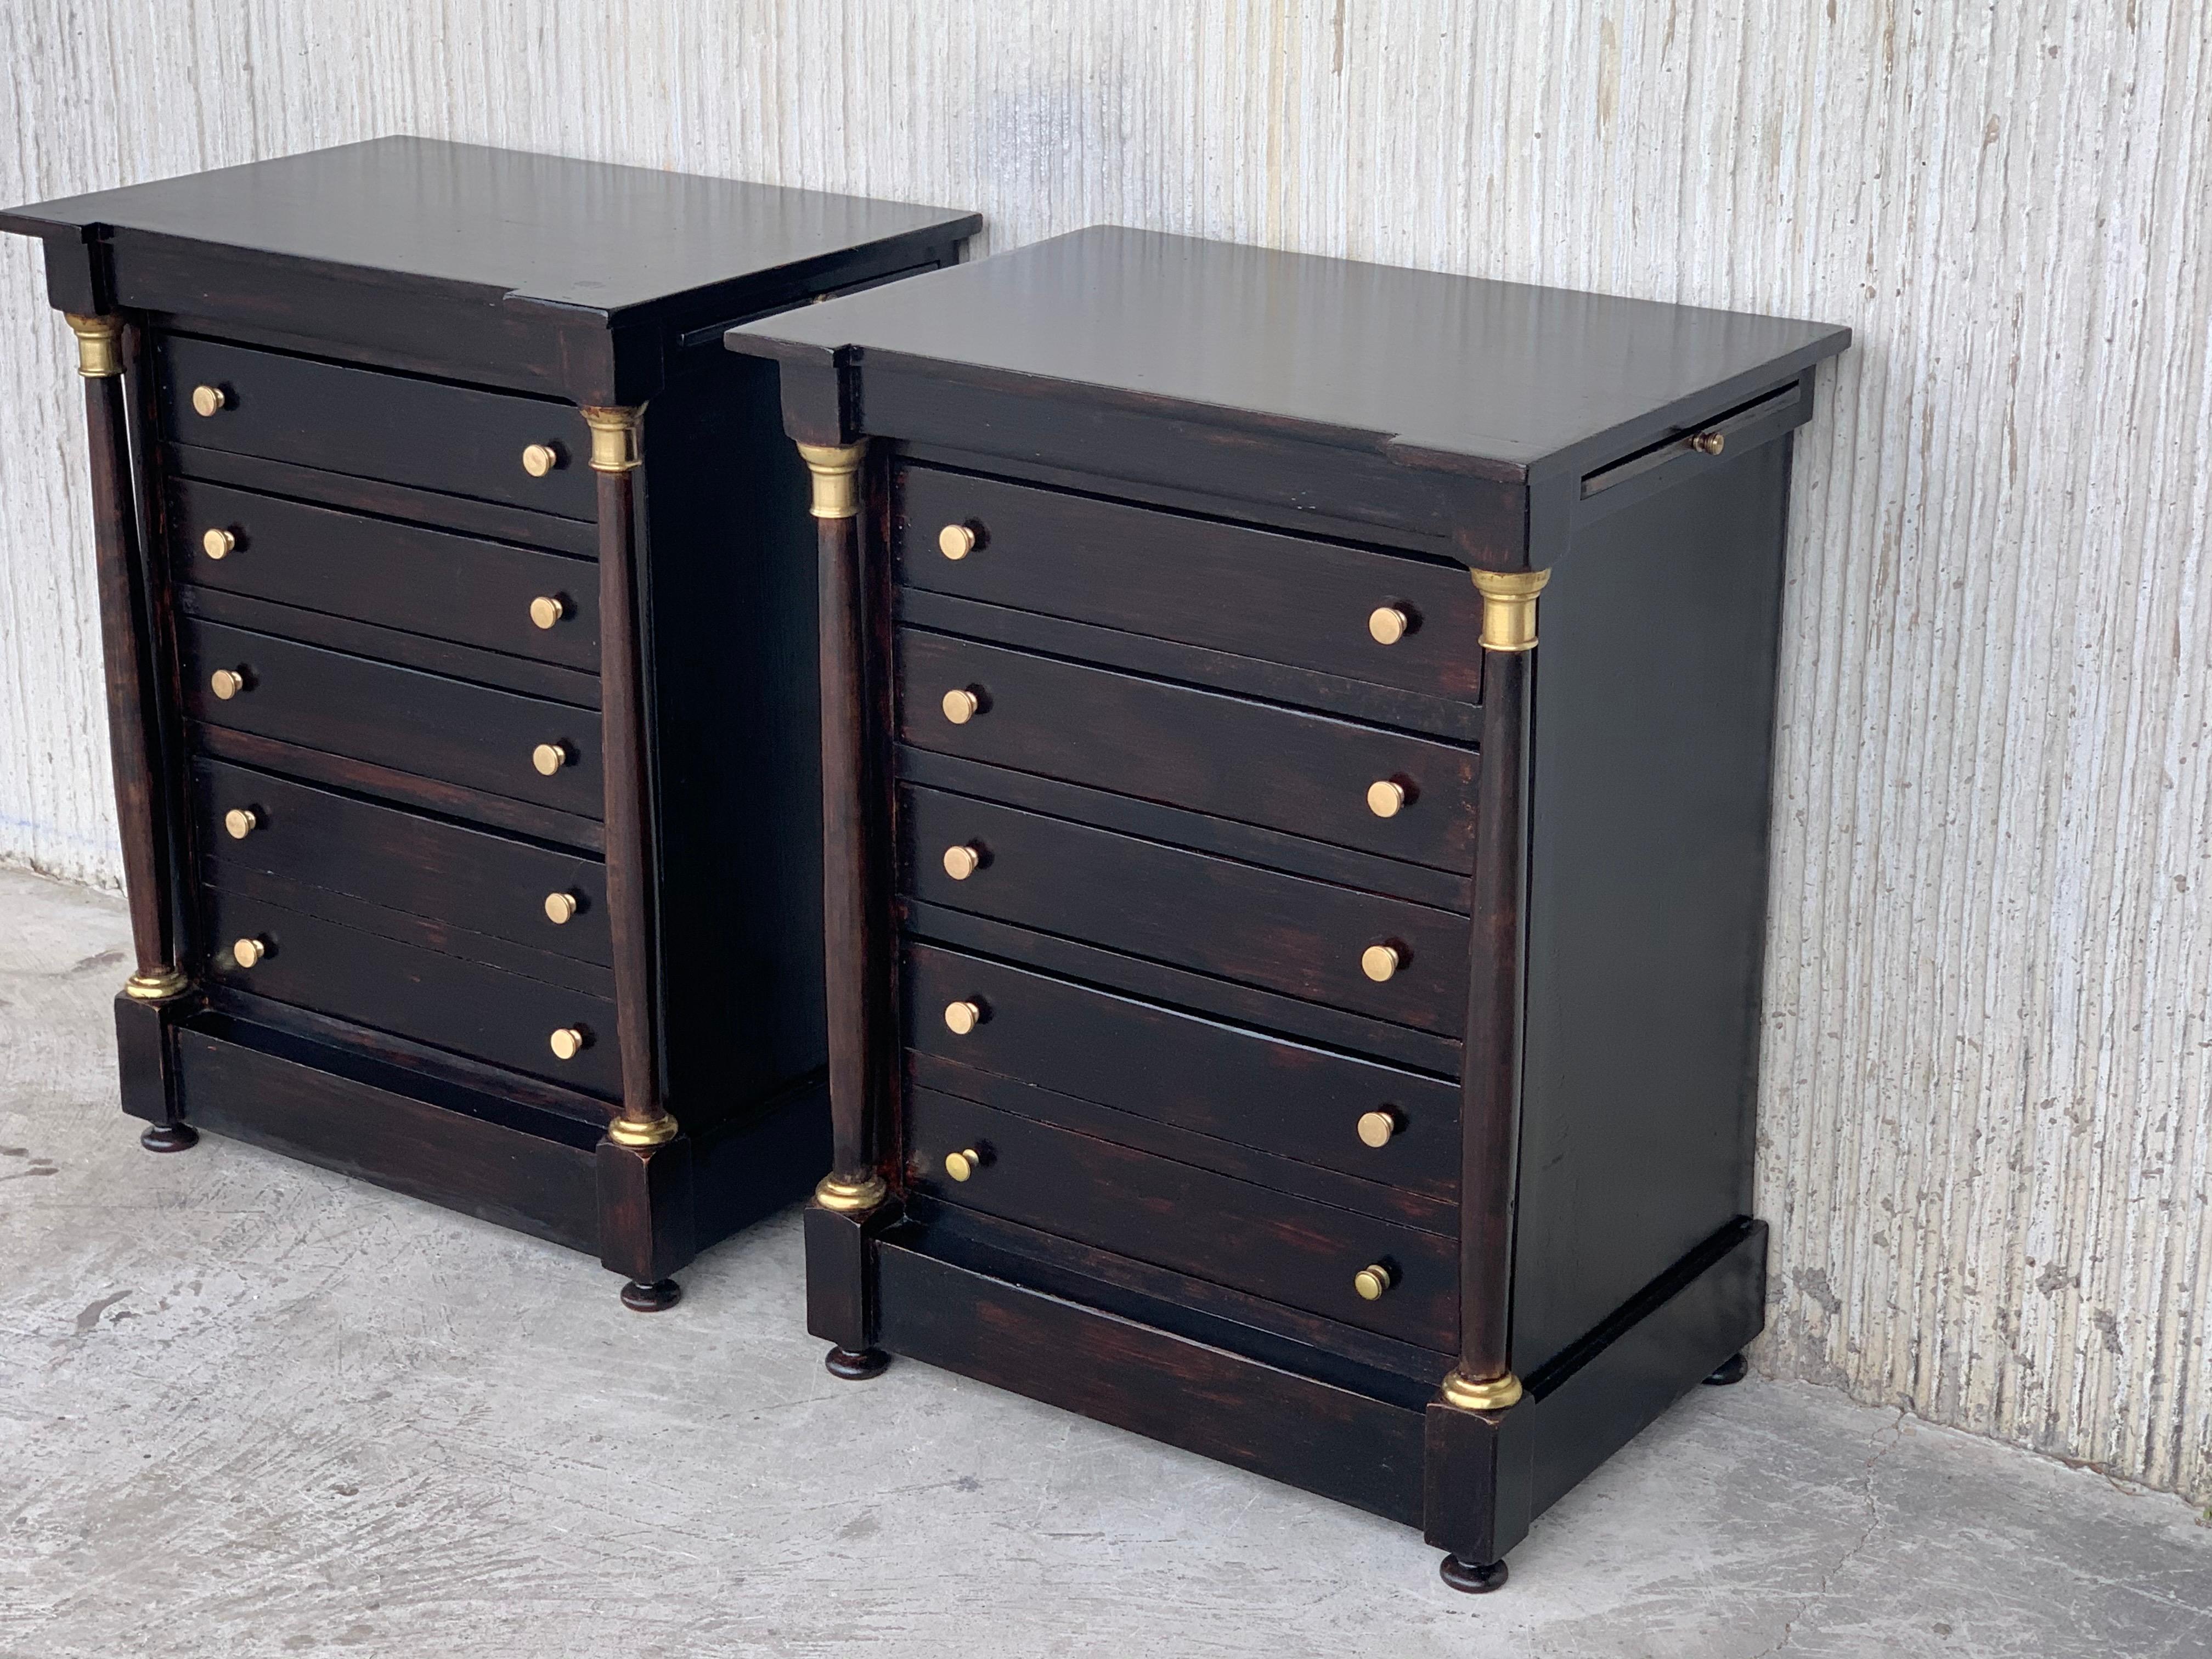 Walnut French Louis XVI Black Ebonized Nightstands or Side Table with Columns